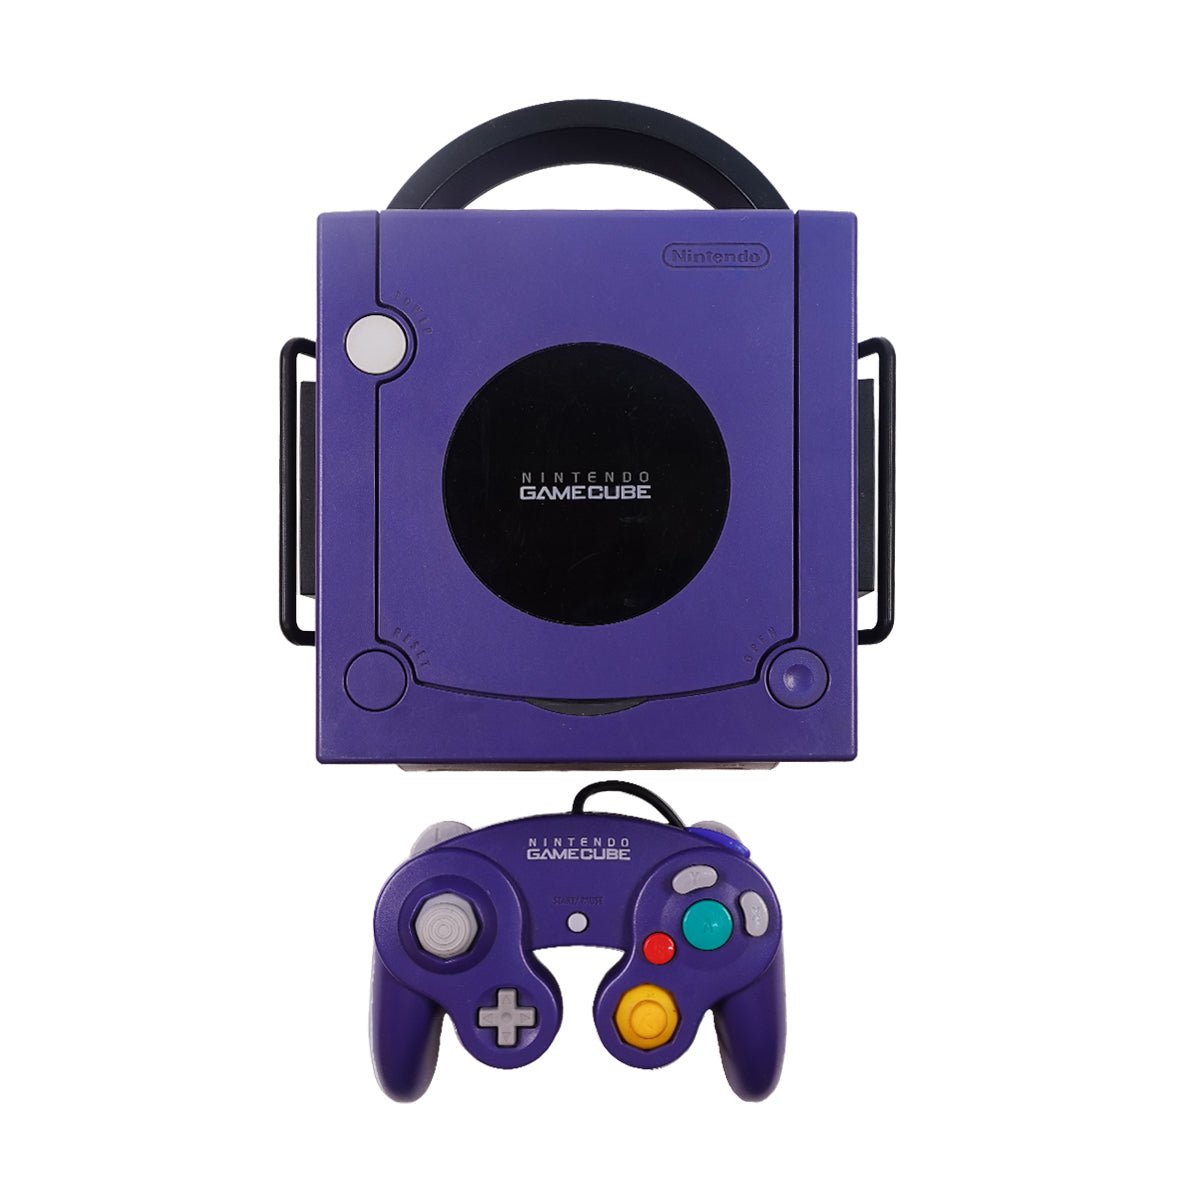 (Pre-Owned) Nintendo GameCube GC Game Console - Blue - Store 974 | ستور ٩٧٤